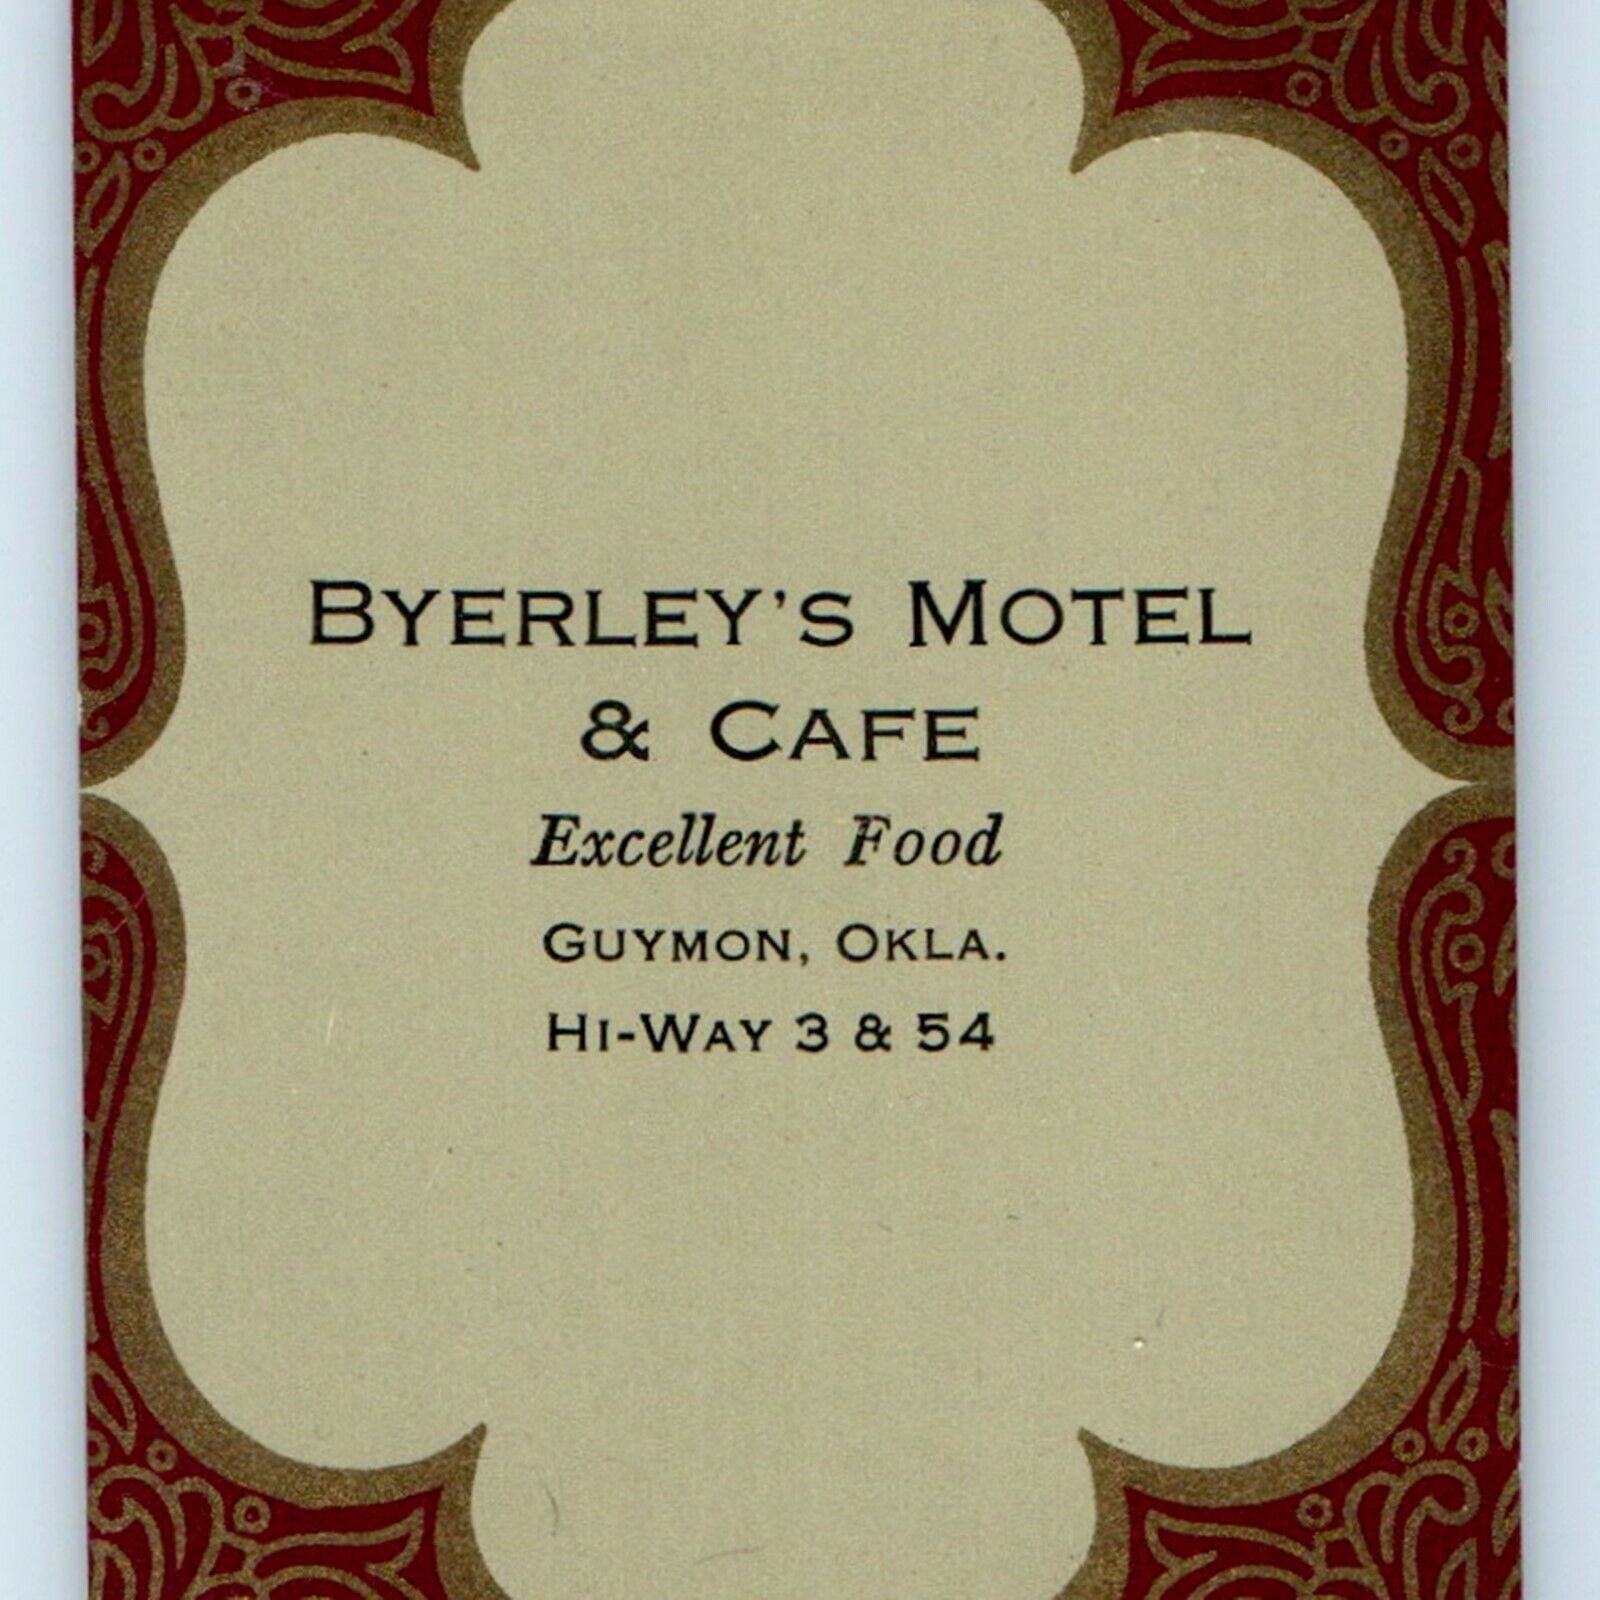 c1950s Guymon, Oklahoma Byerley's Motel & Cafe Business Playing Card Food C25